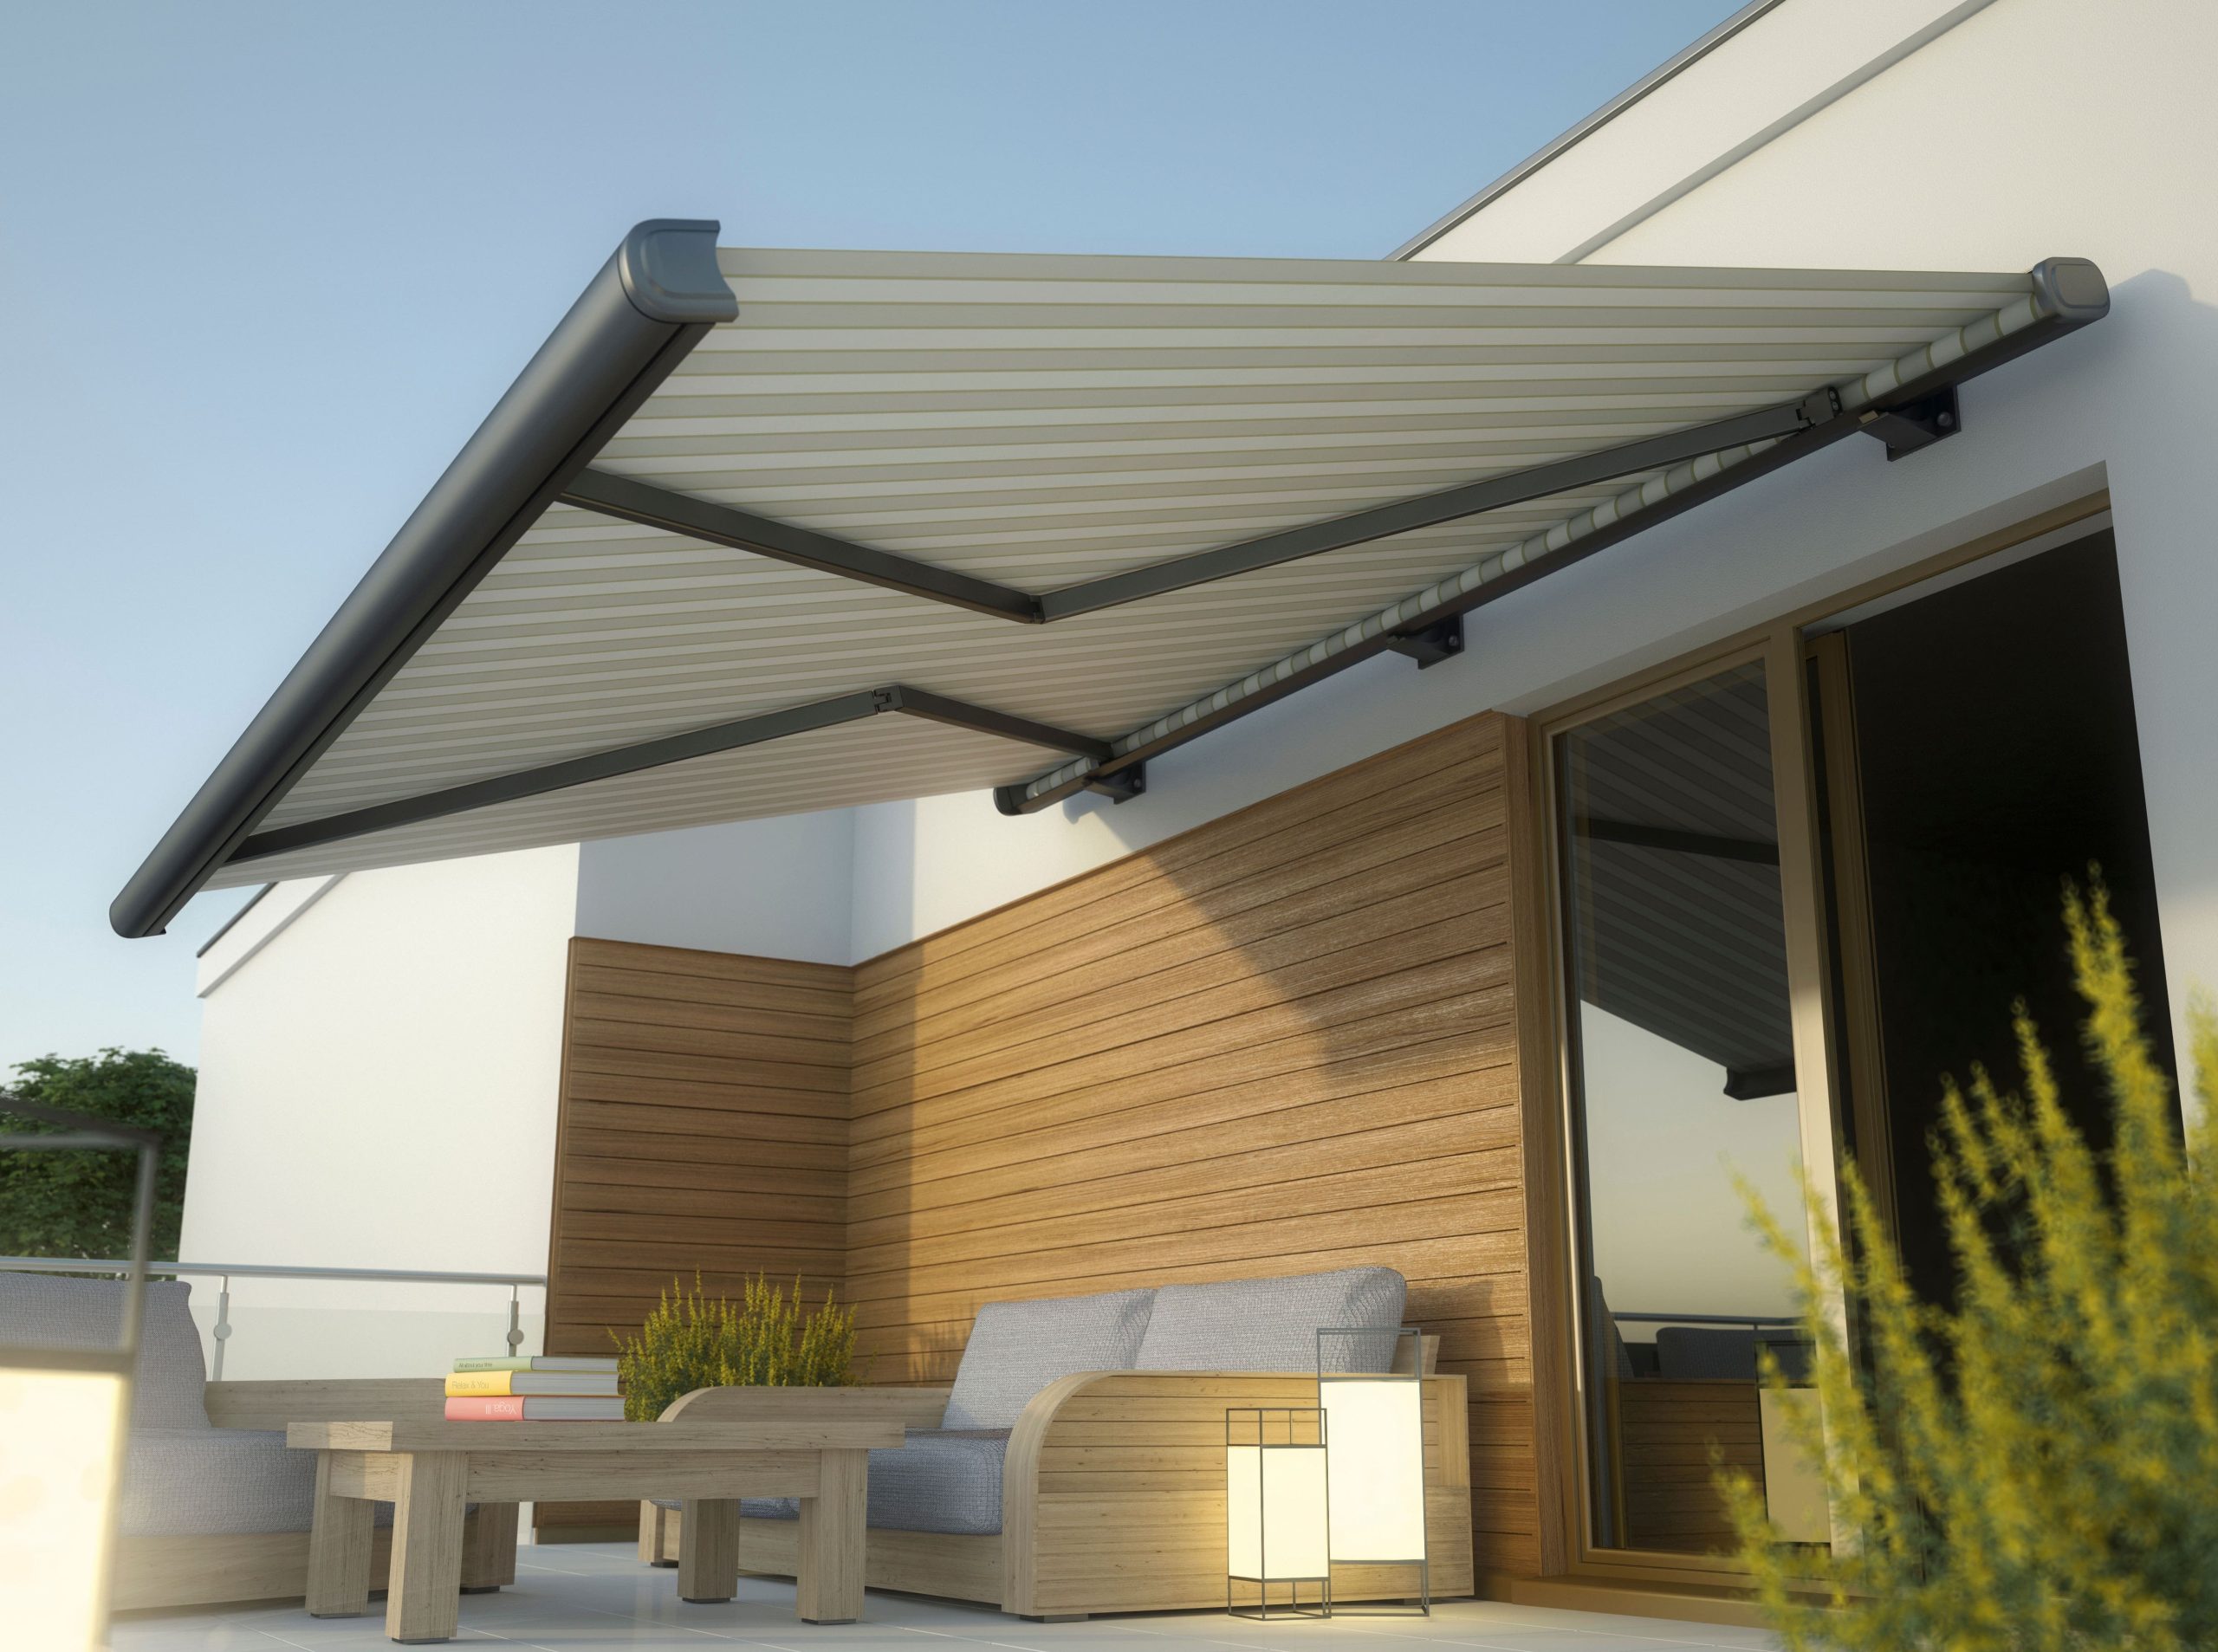 Custom retractable awnings installation in Tacoma